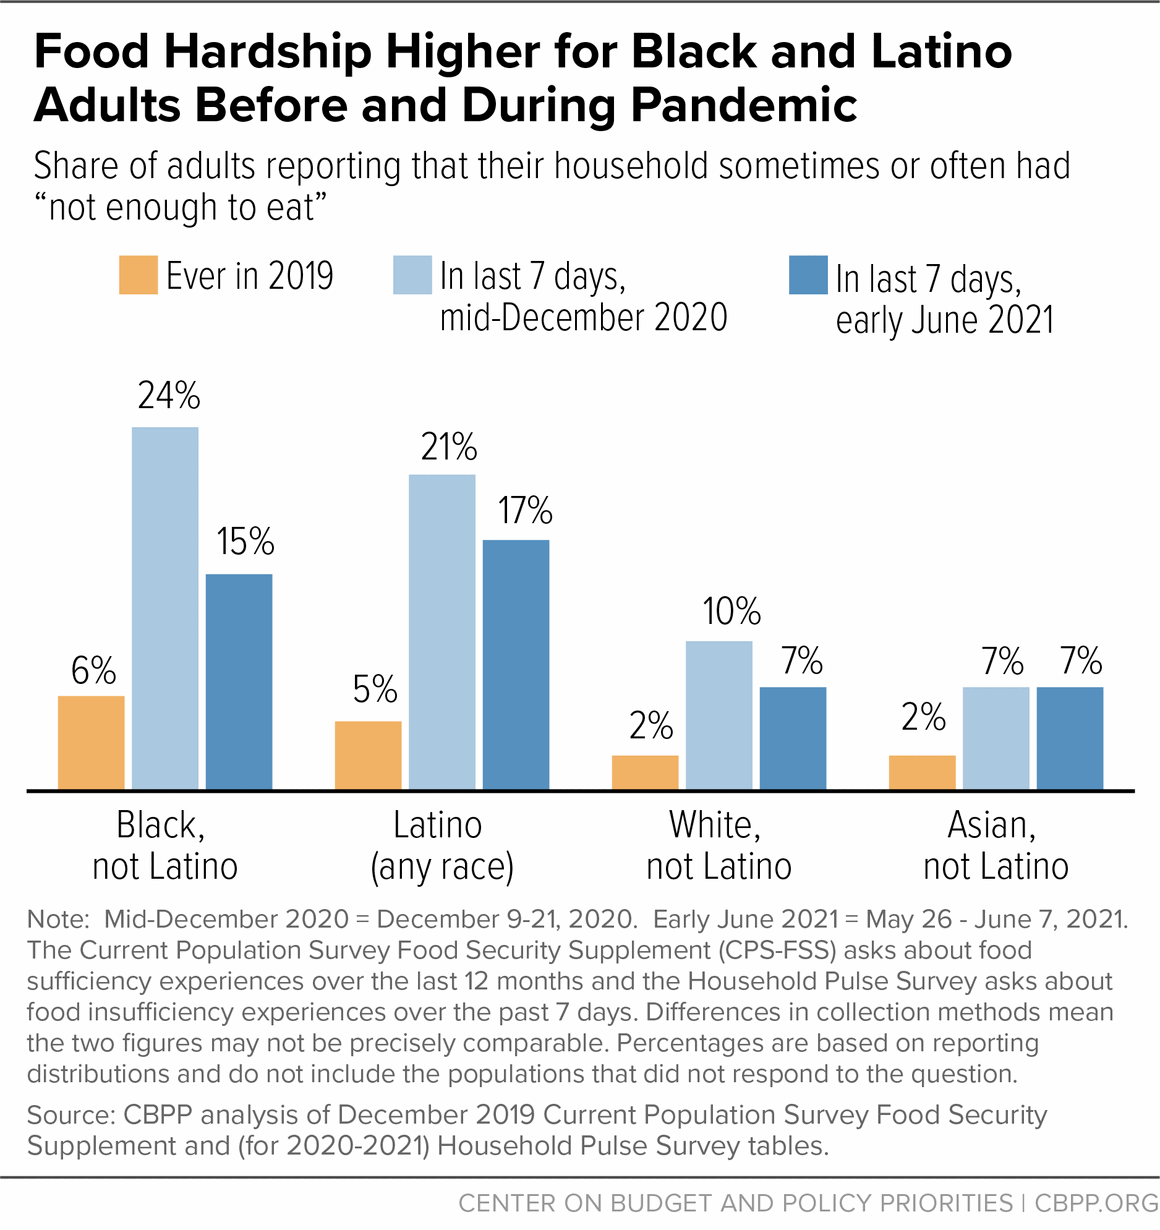 Food Hardship Higher for Black and Latino Adults Before and During Pandemic